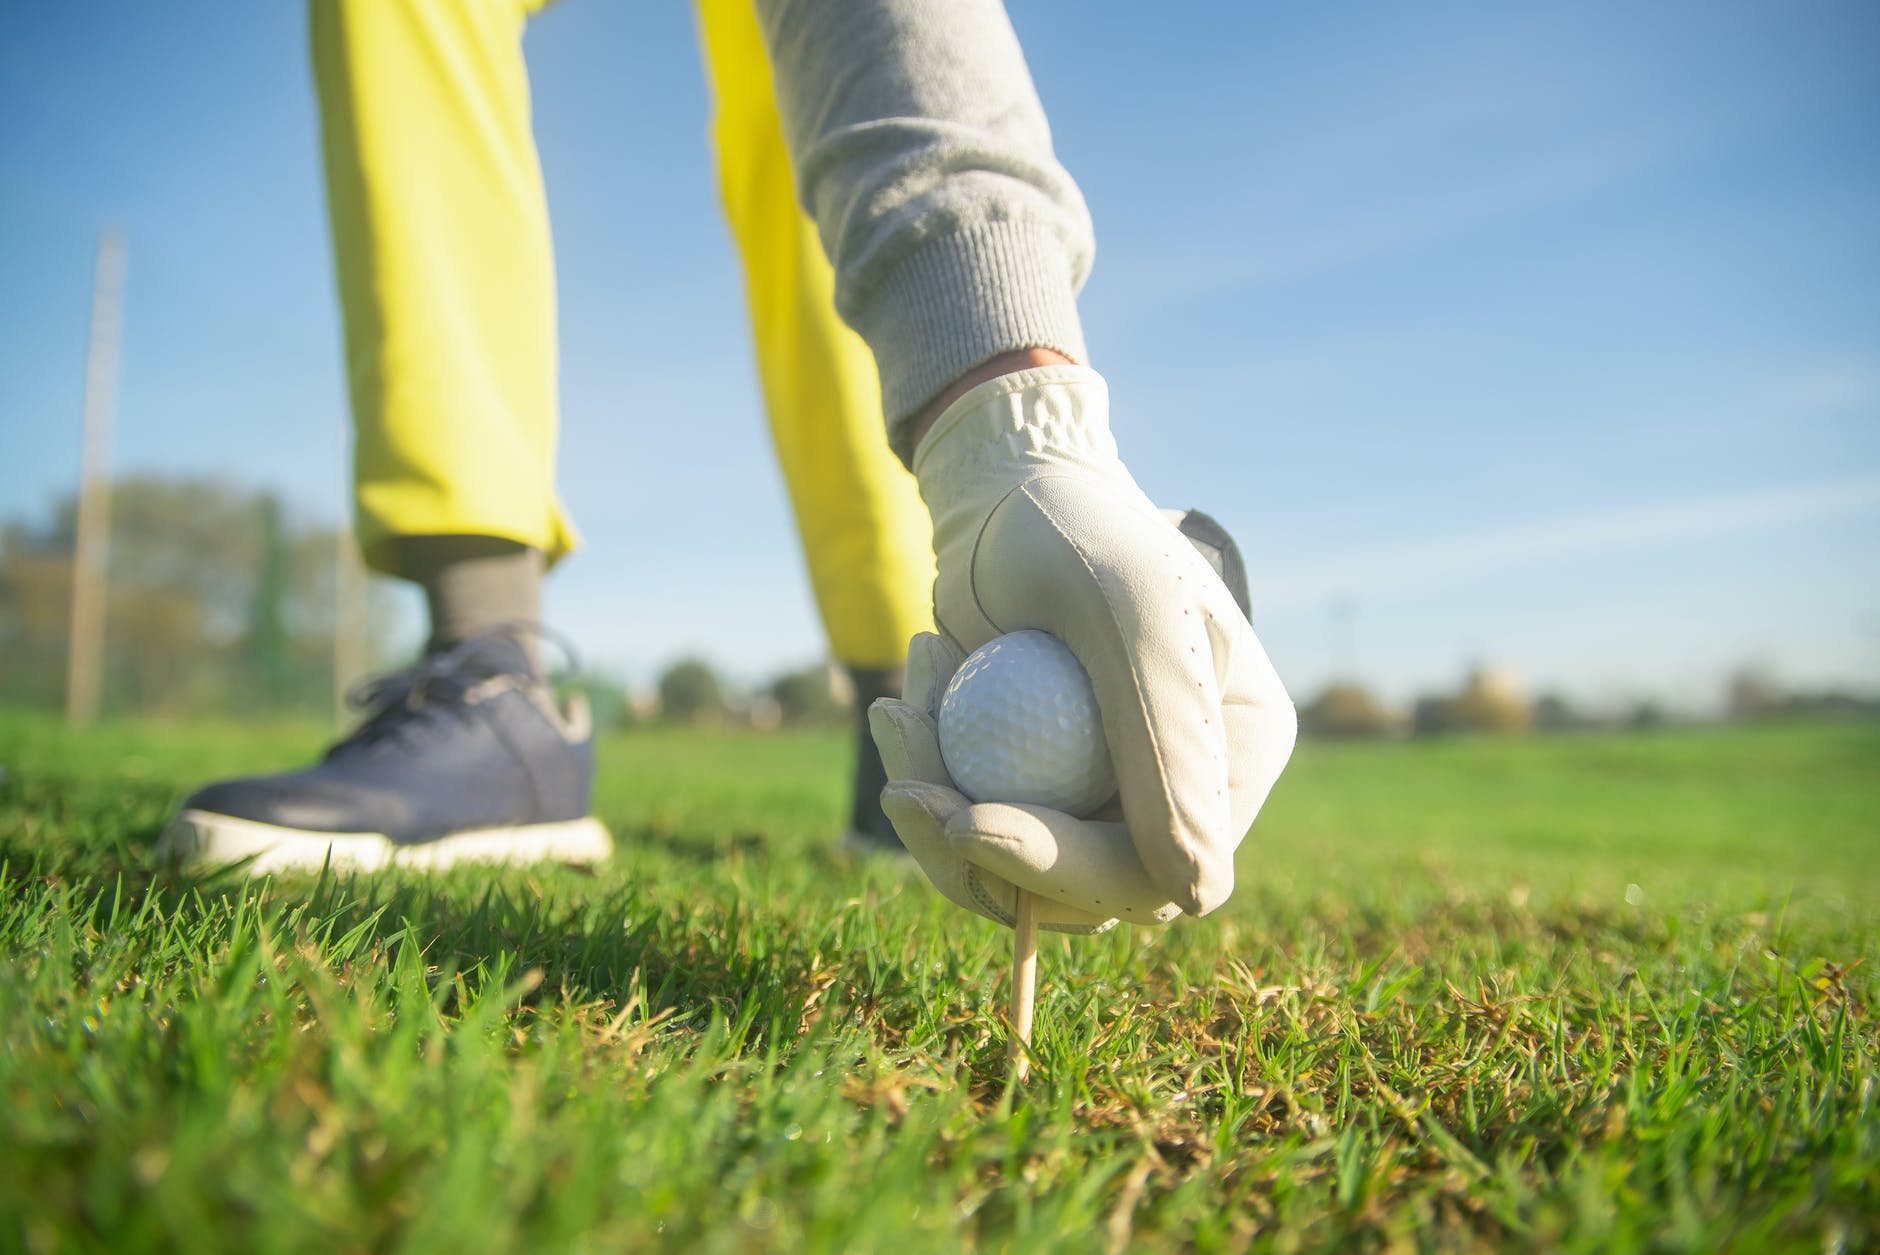 a person wearing a glove while holding a golf ball